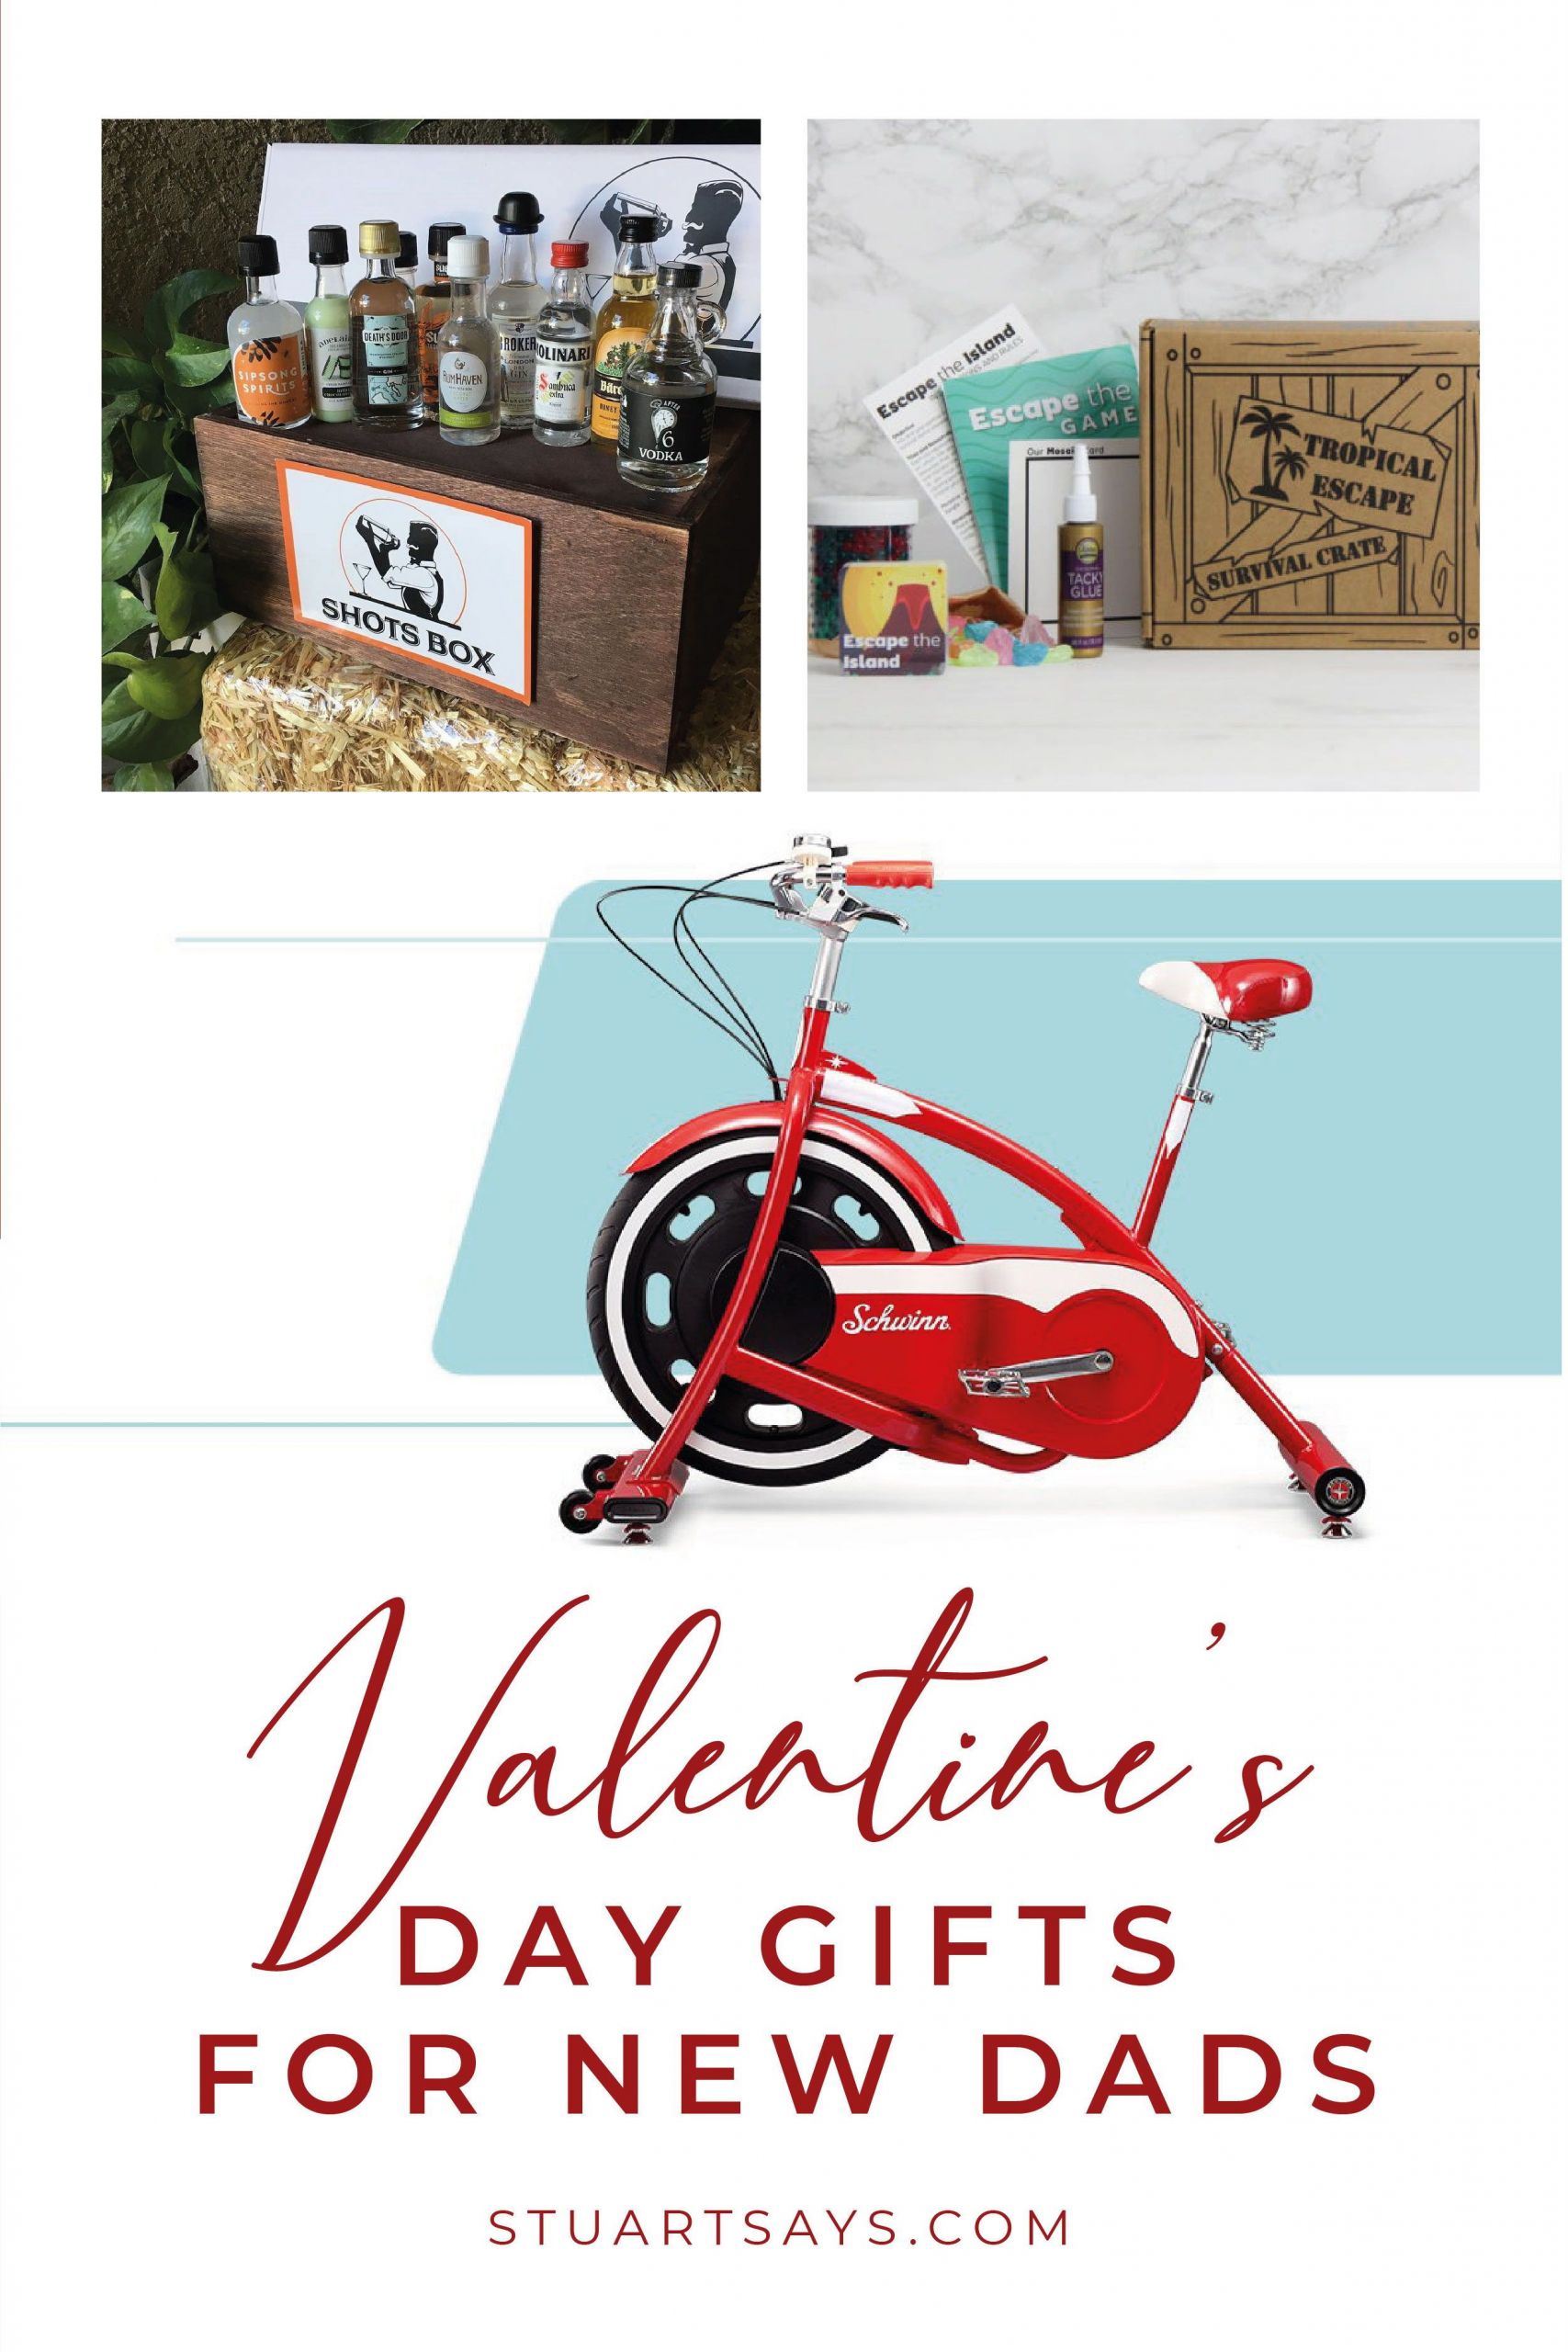 Valentines Gift Ideas For Dad
 Valentine’s Day Gifts for New Dads